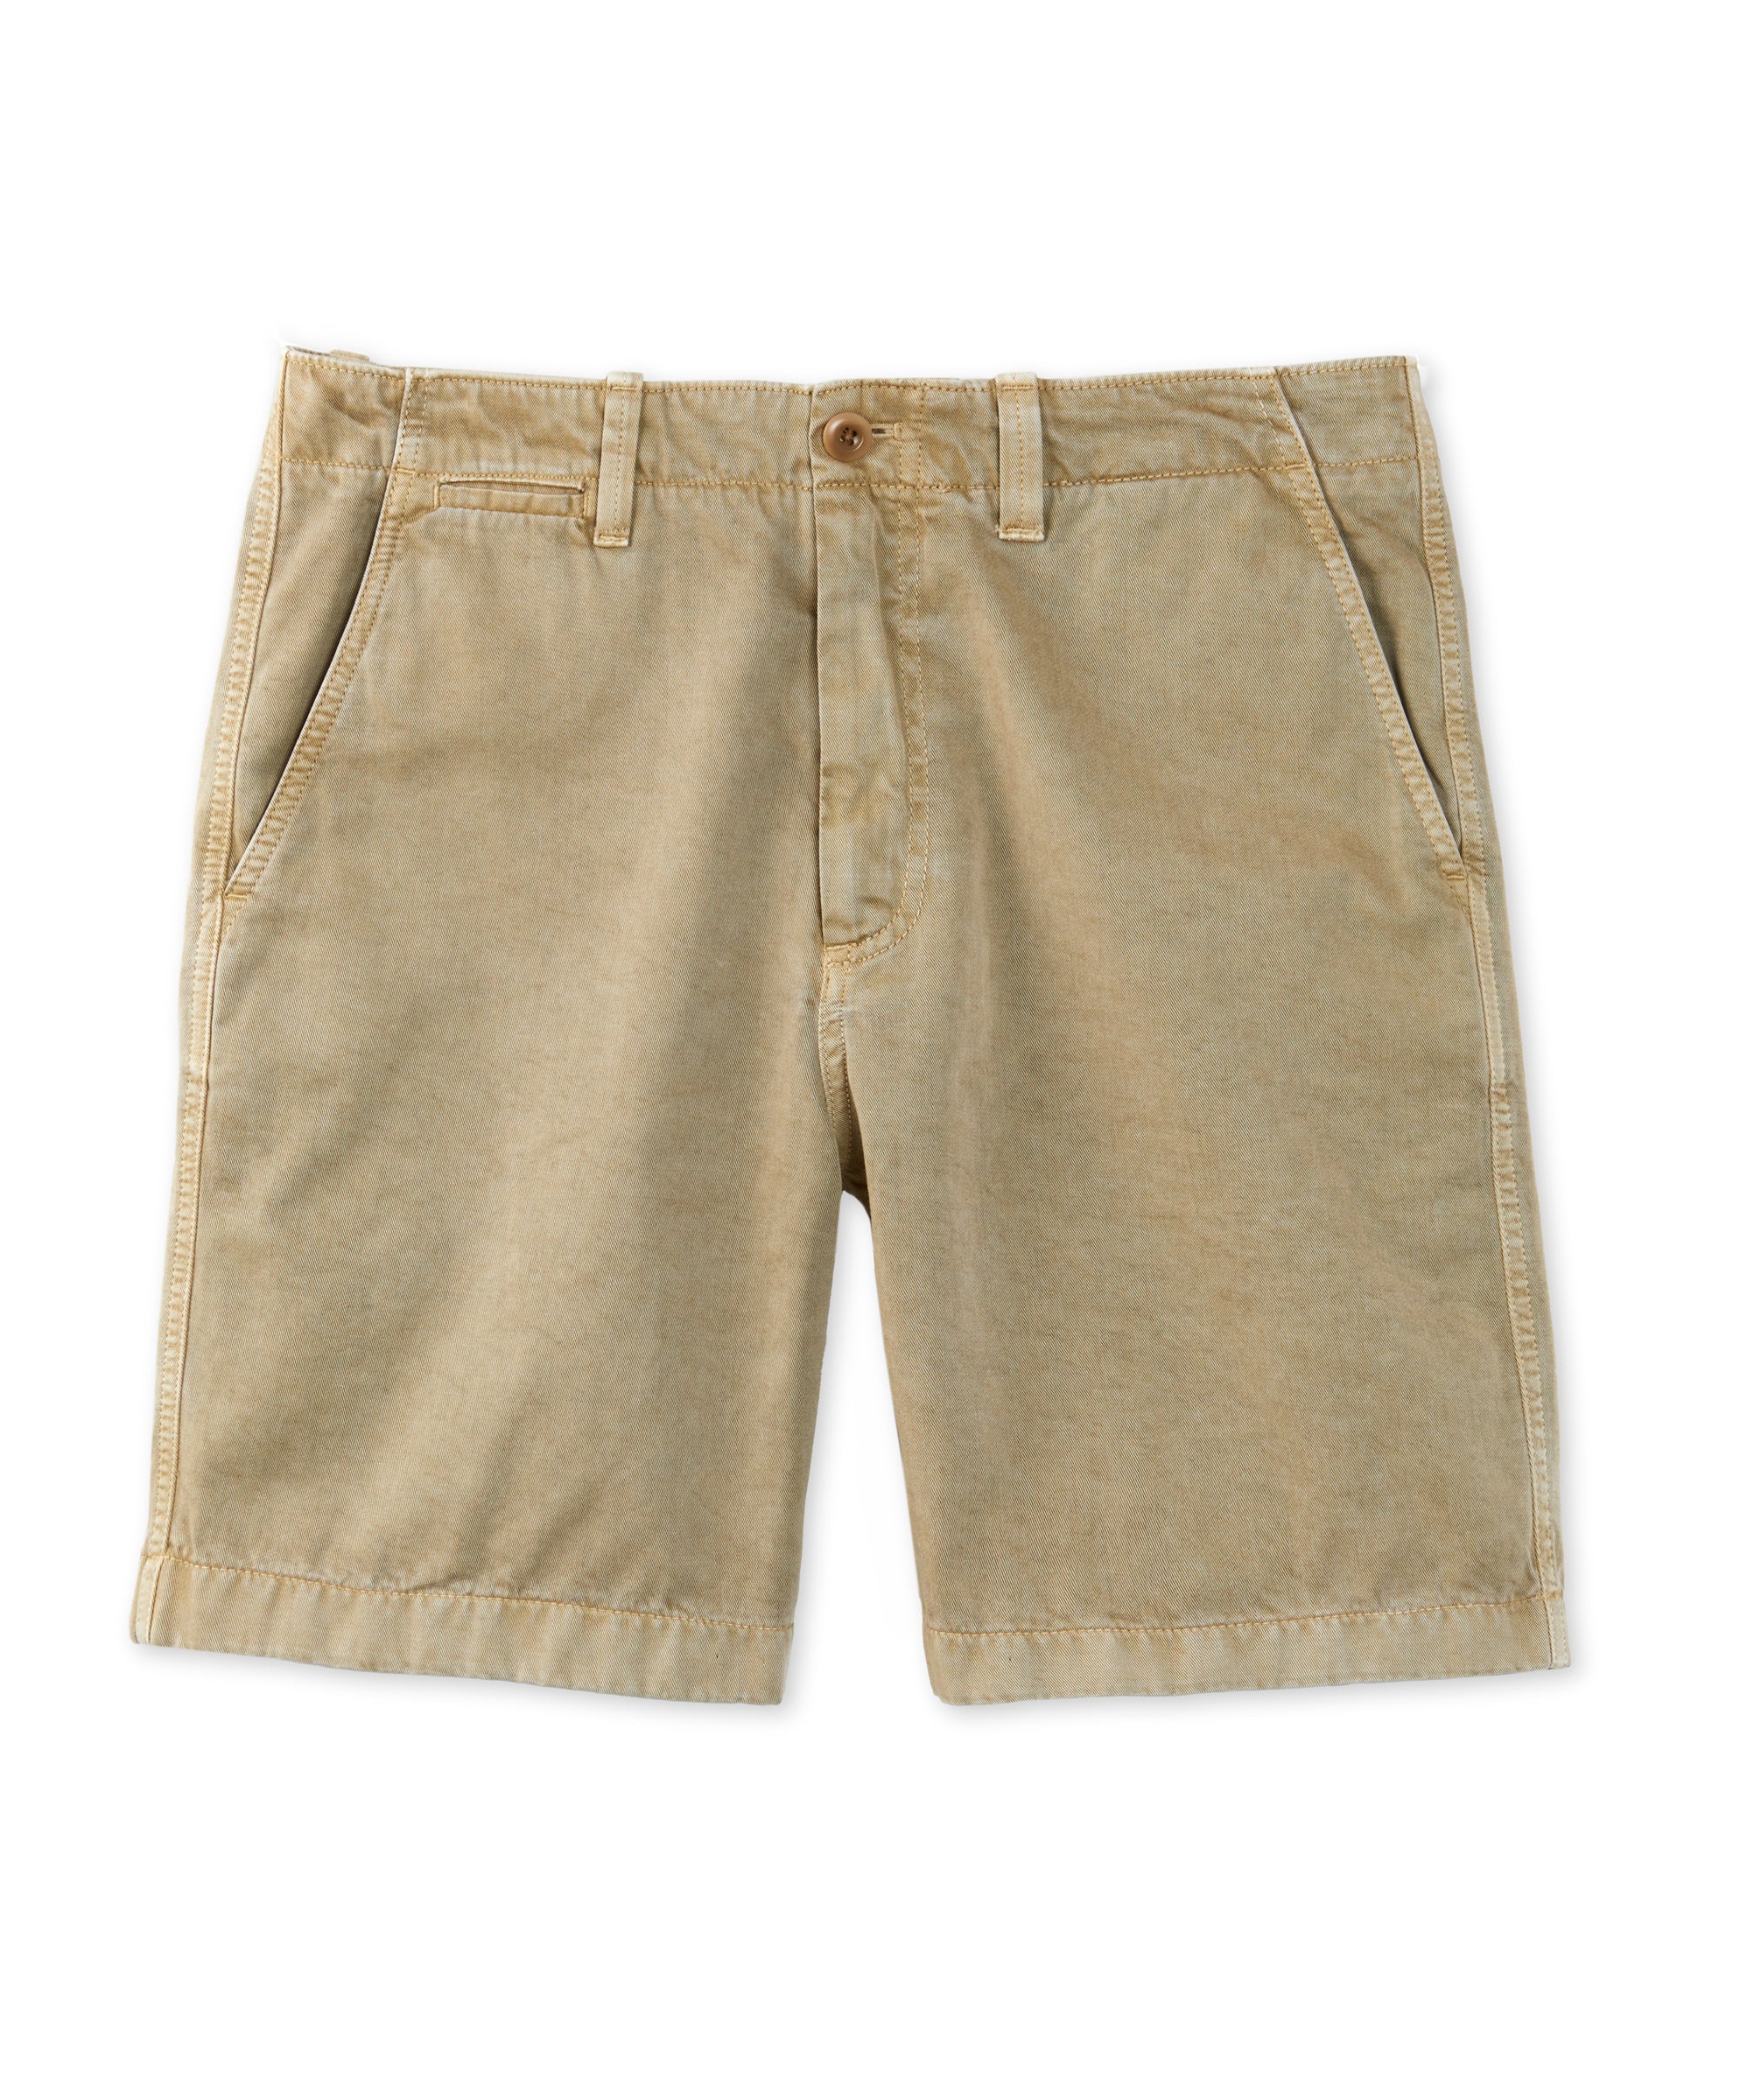 Nomad Chino Short | Men's Shorts | Outerknown